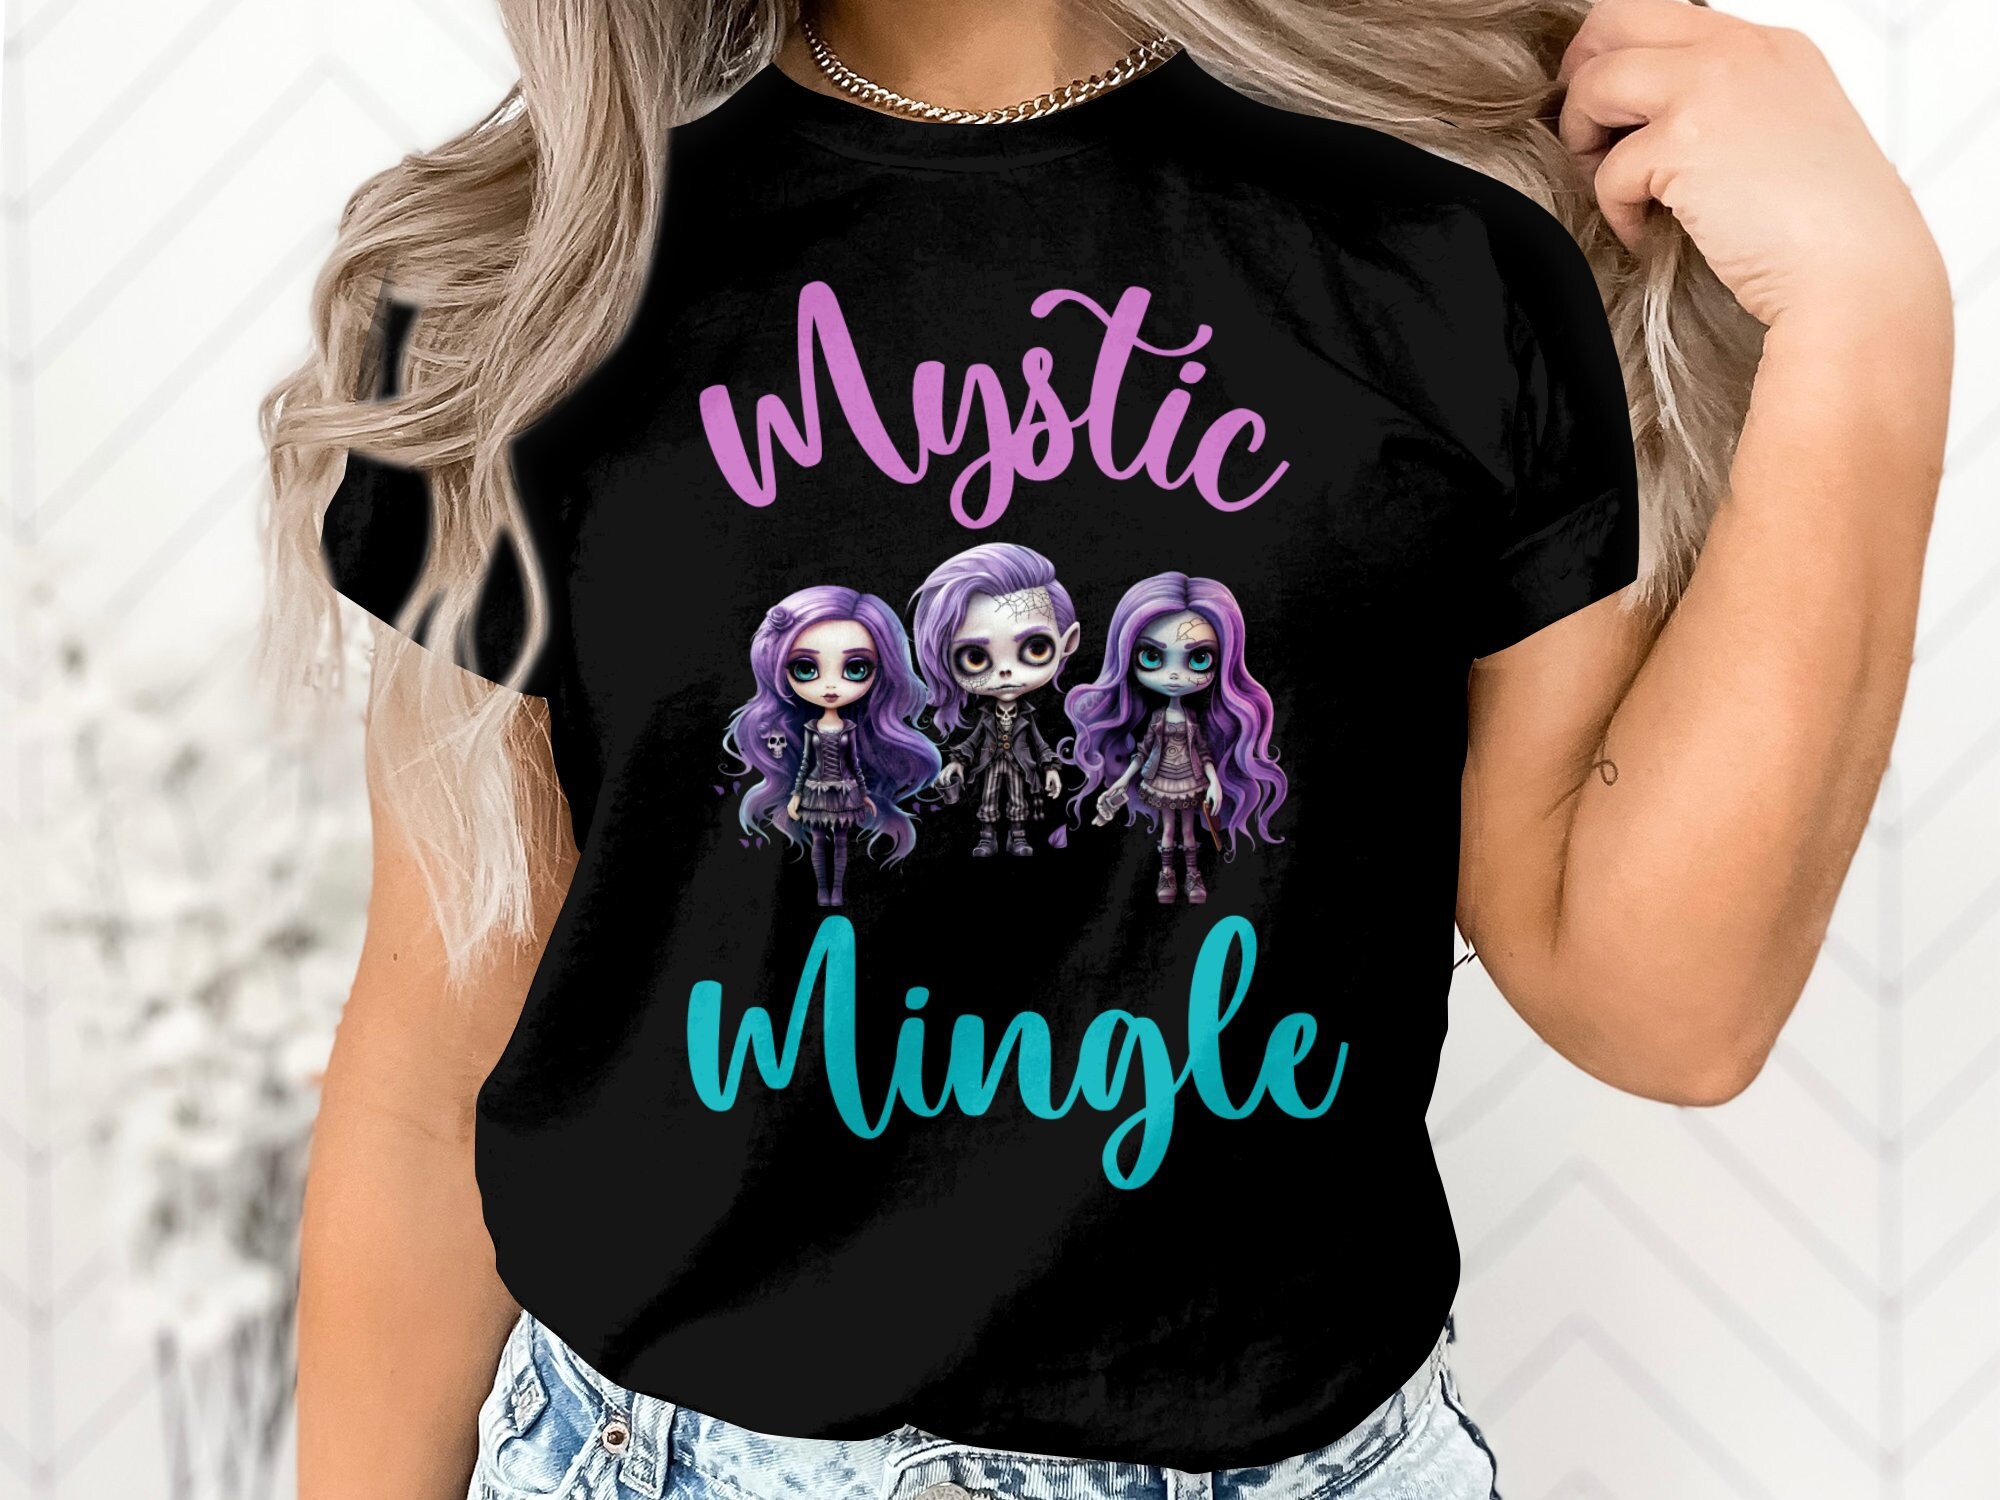 Discover Cute Halloween Group T-shirt, "Mystic Mingle" Group Tees: Dive into Halloween's Enchanted World! Toddler Boys Girls Youth funny Tshirts